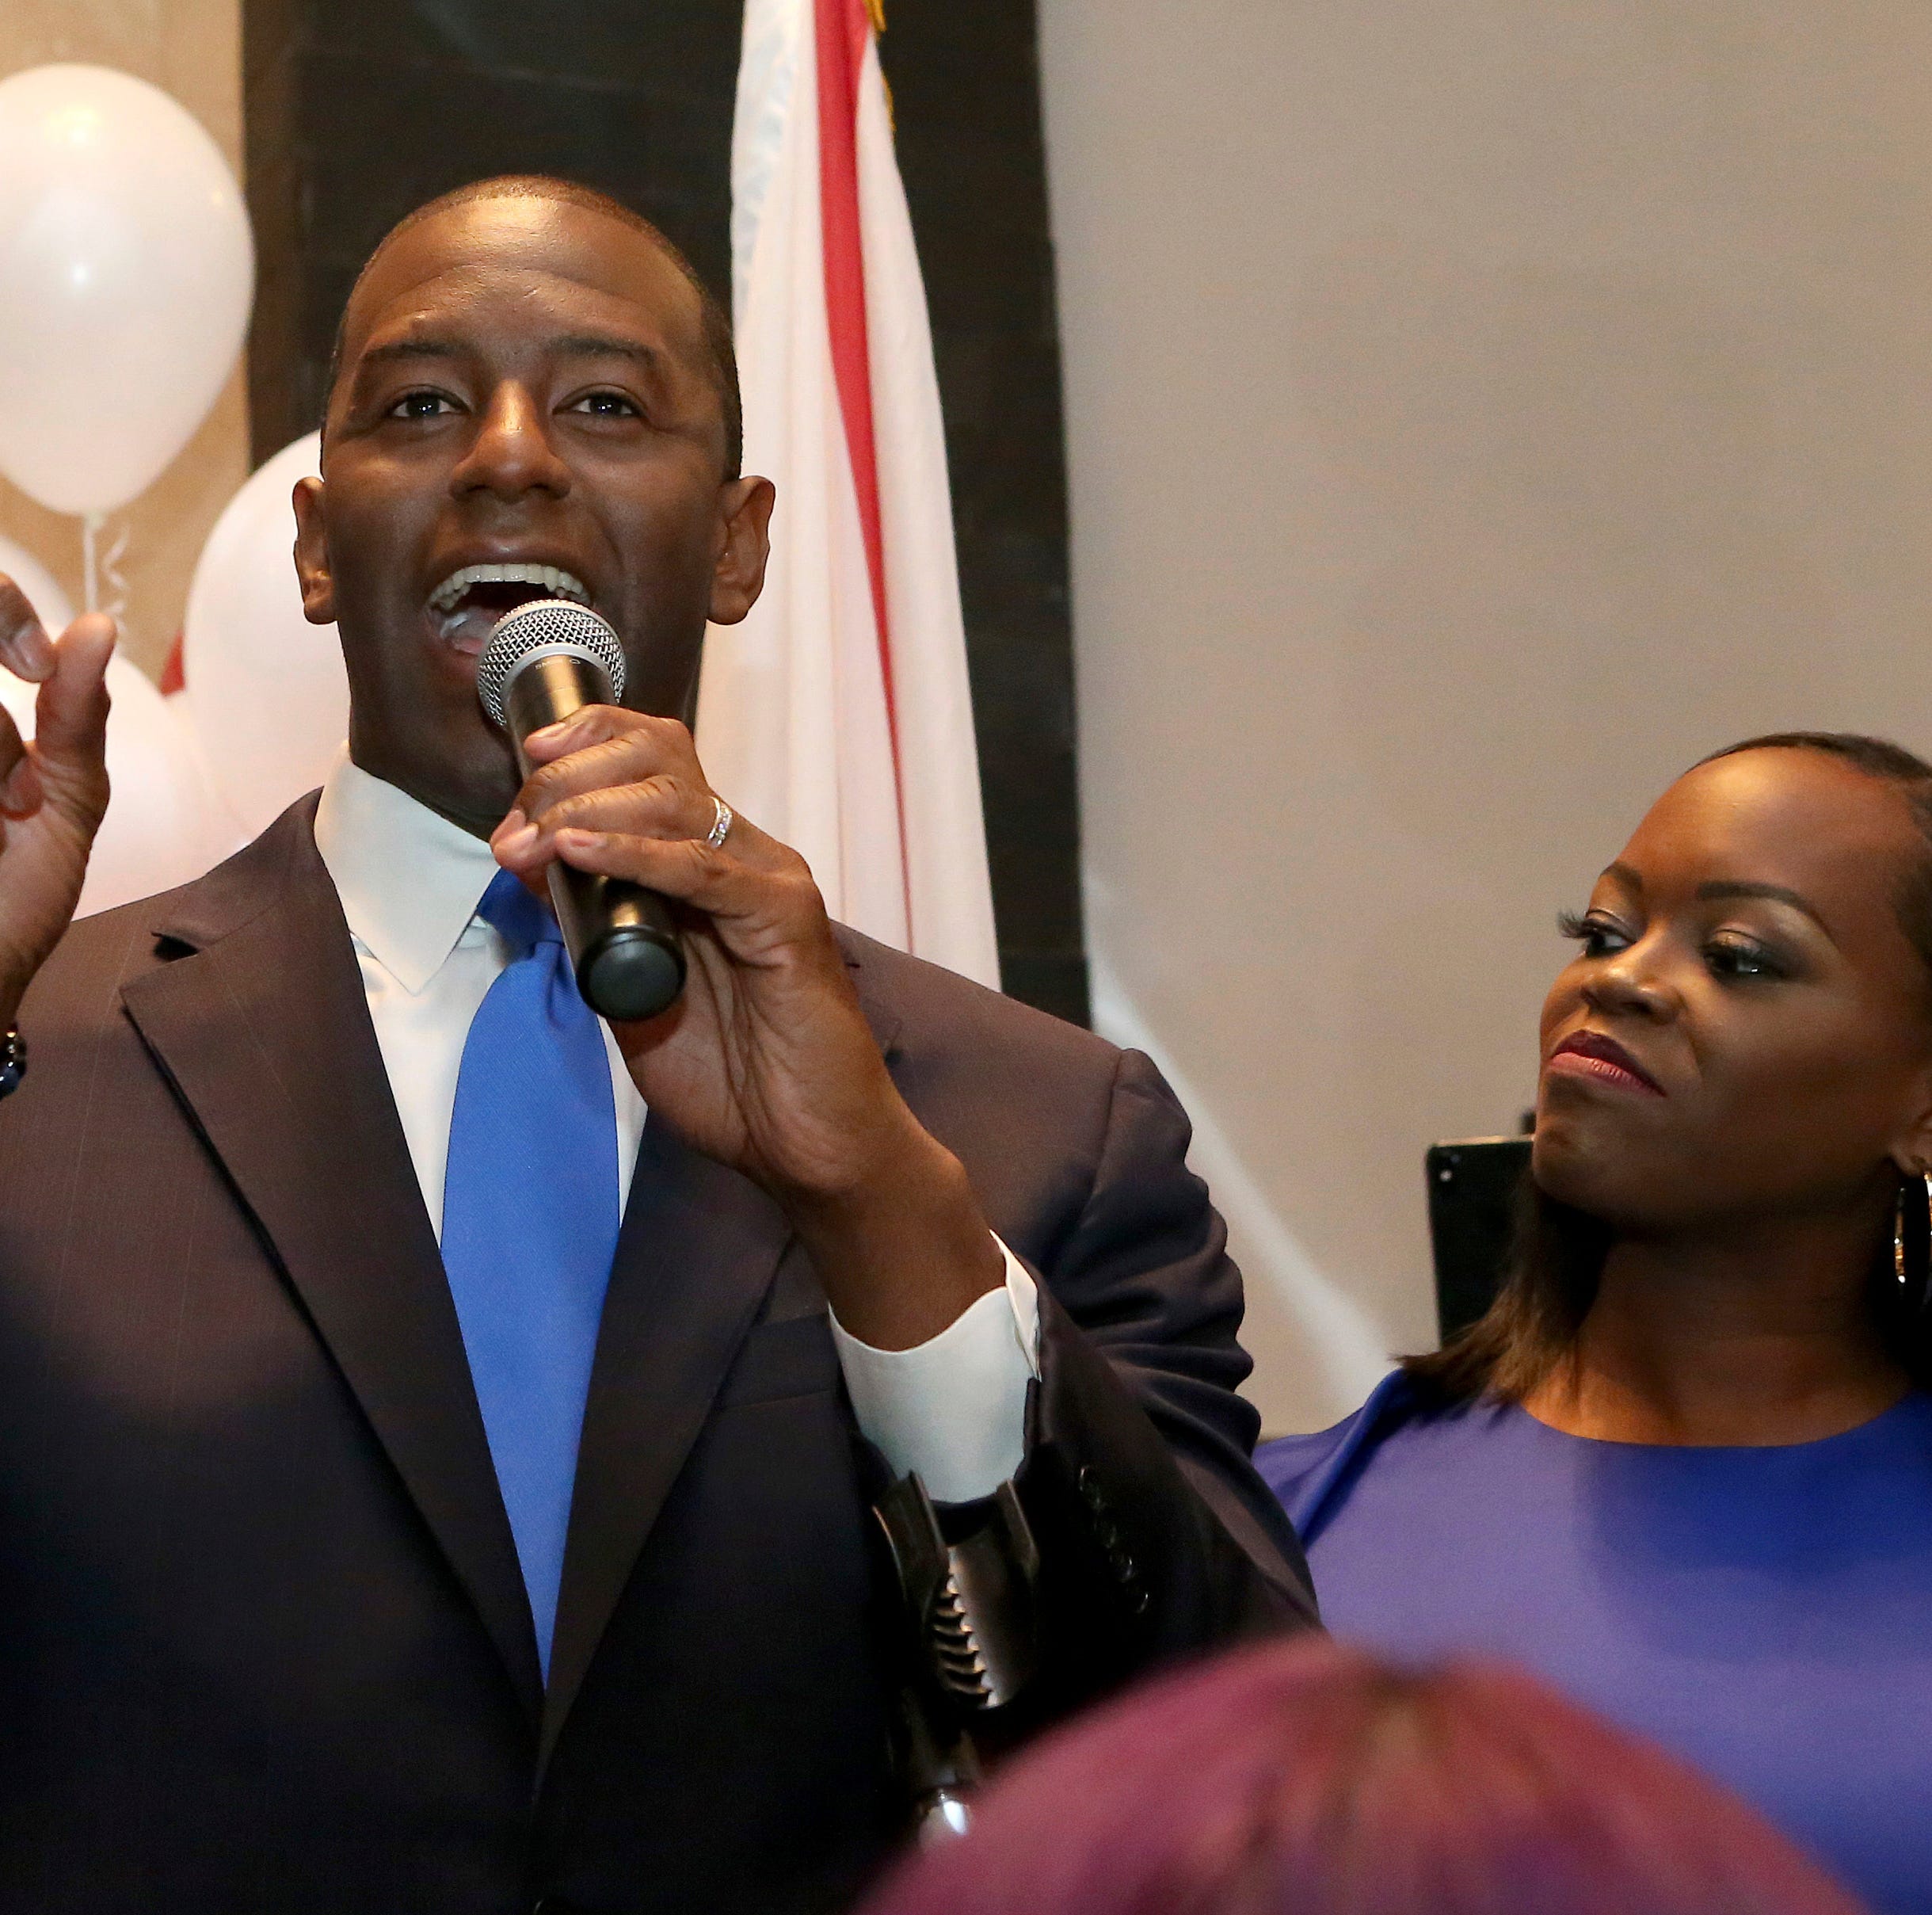 Andrew Gillum with his wife, R. Jai Gillum at his side addresses his supporters after winning the Democrat primary for governor on Tuesday, Aug. 28, 2018, in Tallahassee, Fla.